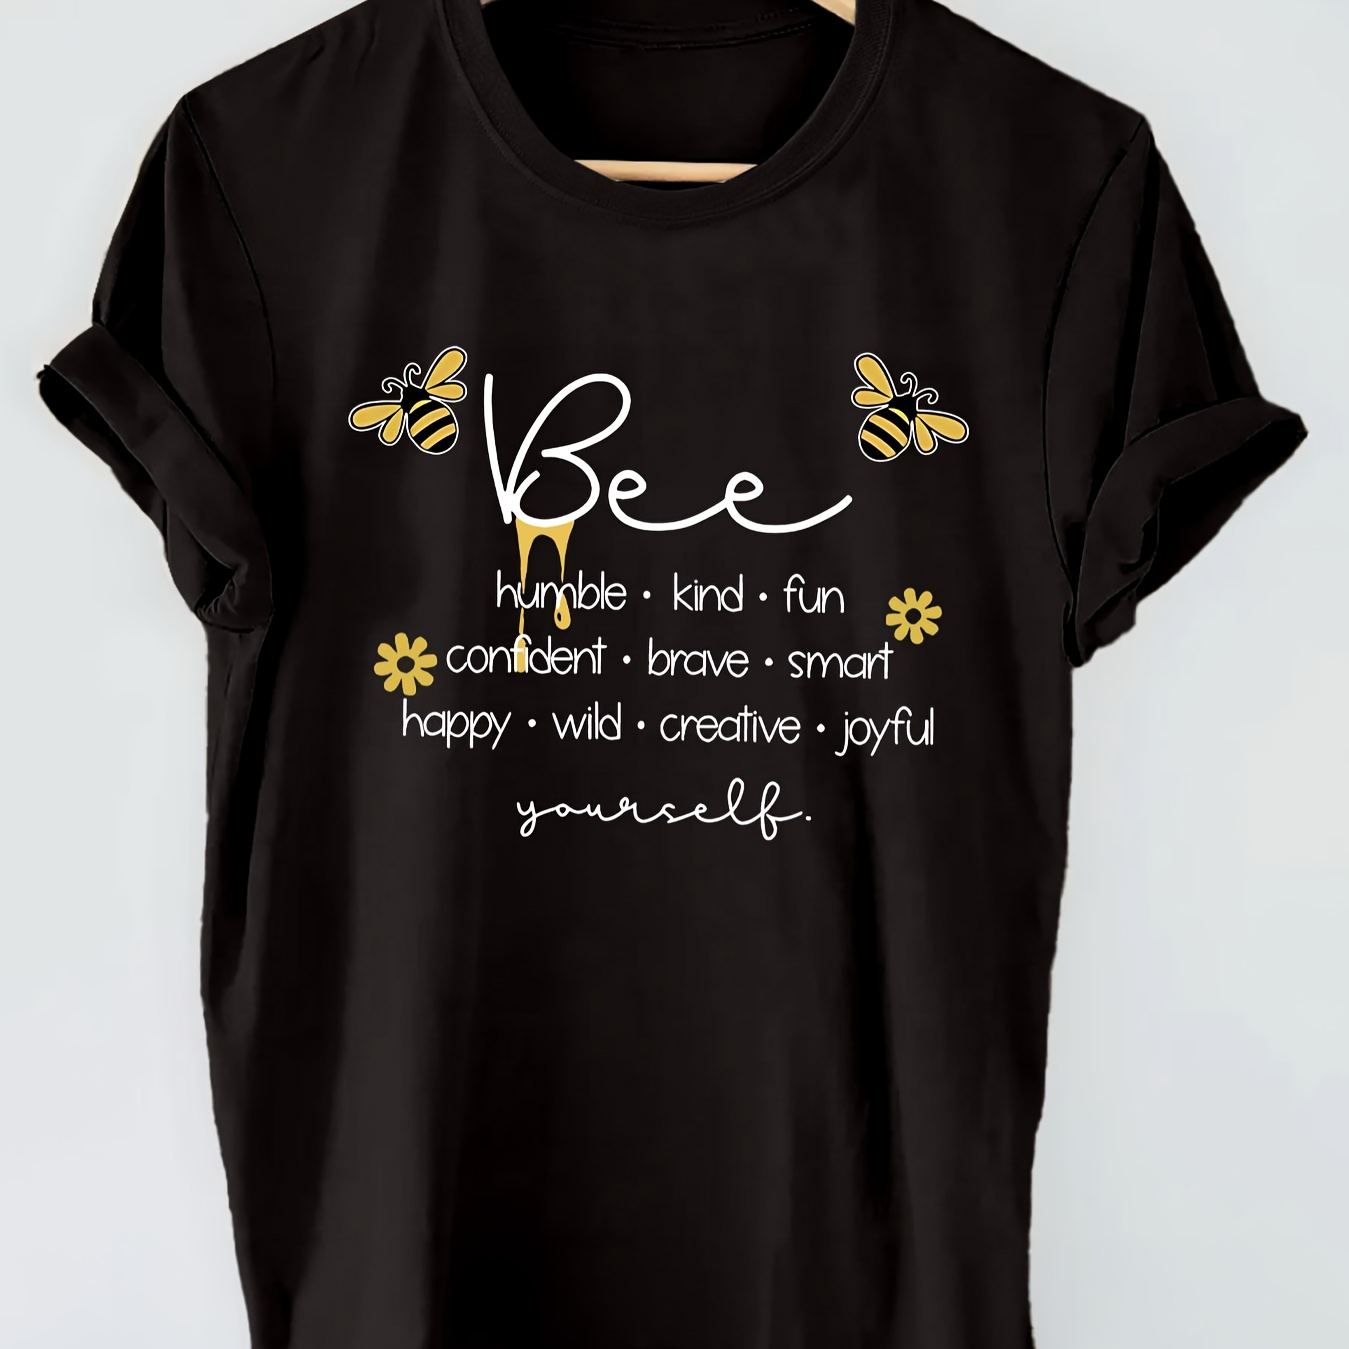 

Bee & Floral Print T-shirt, Short Sleeve Crew Neck Casual Top For Summer & Spring, Women's Clothing